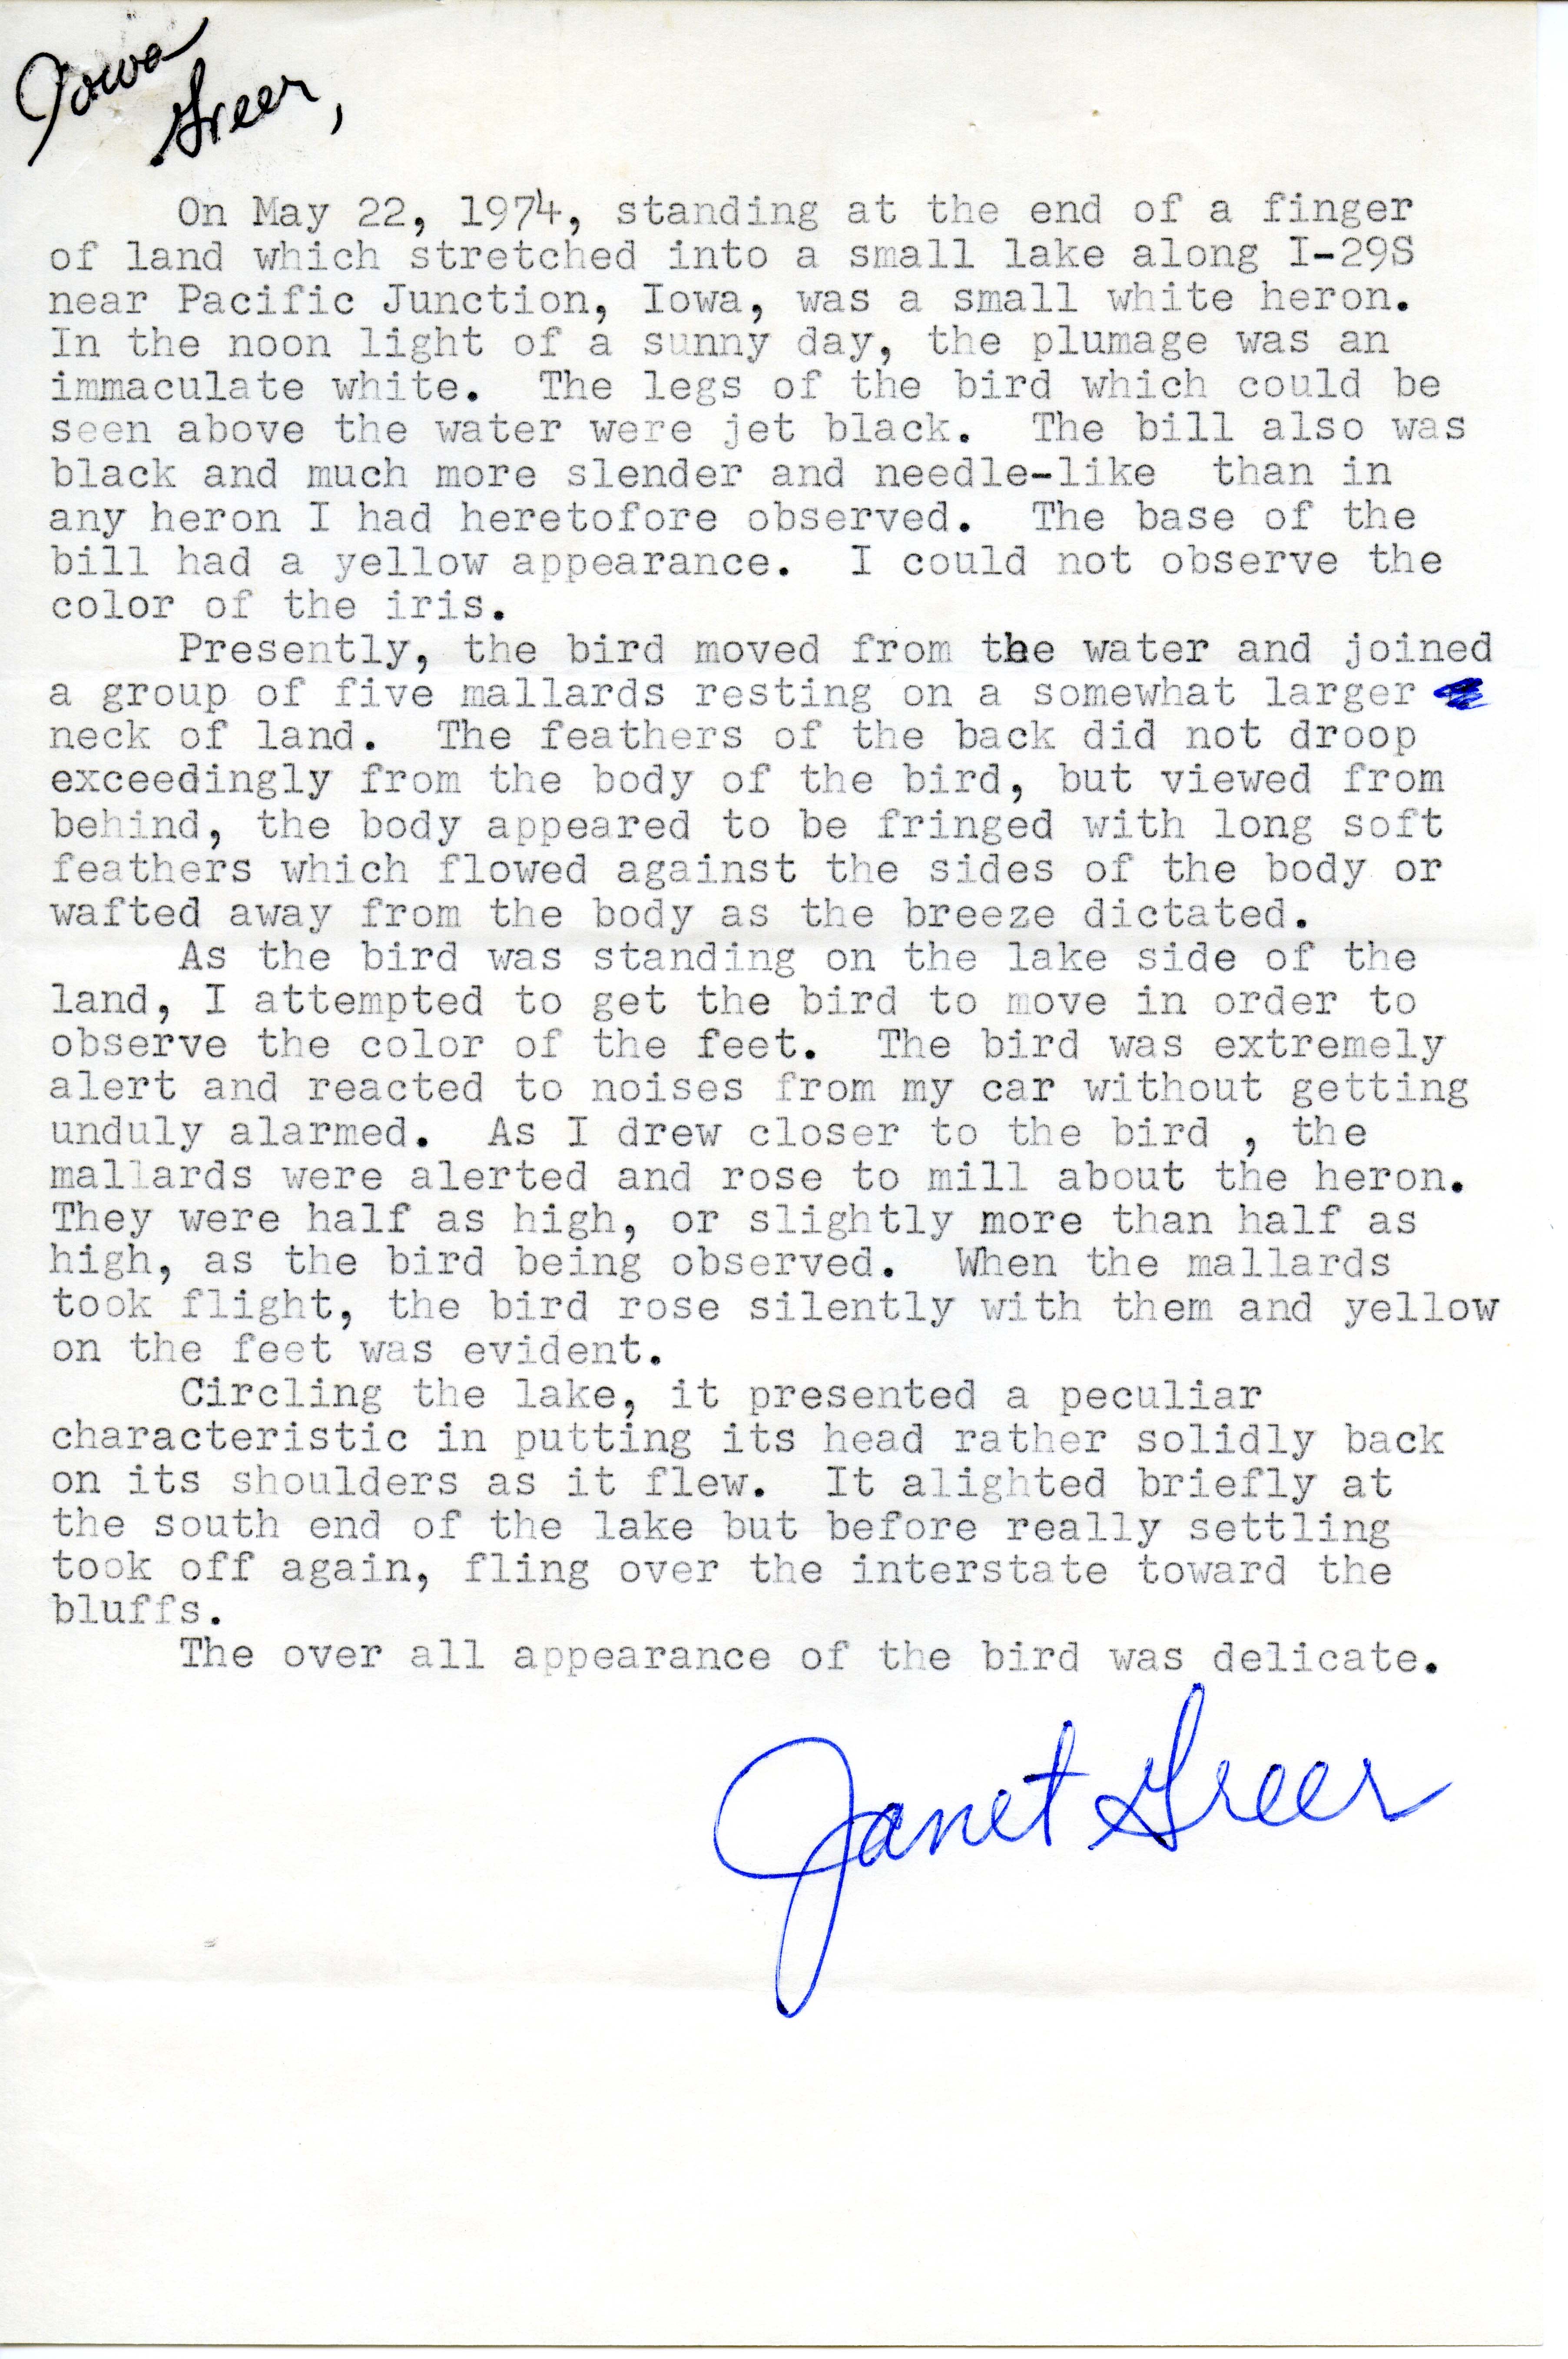 Letter from Janet Greer to Vernon M. Kleen reporting a Snowy Egret, May 22, 1974. 